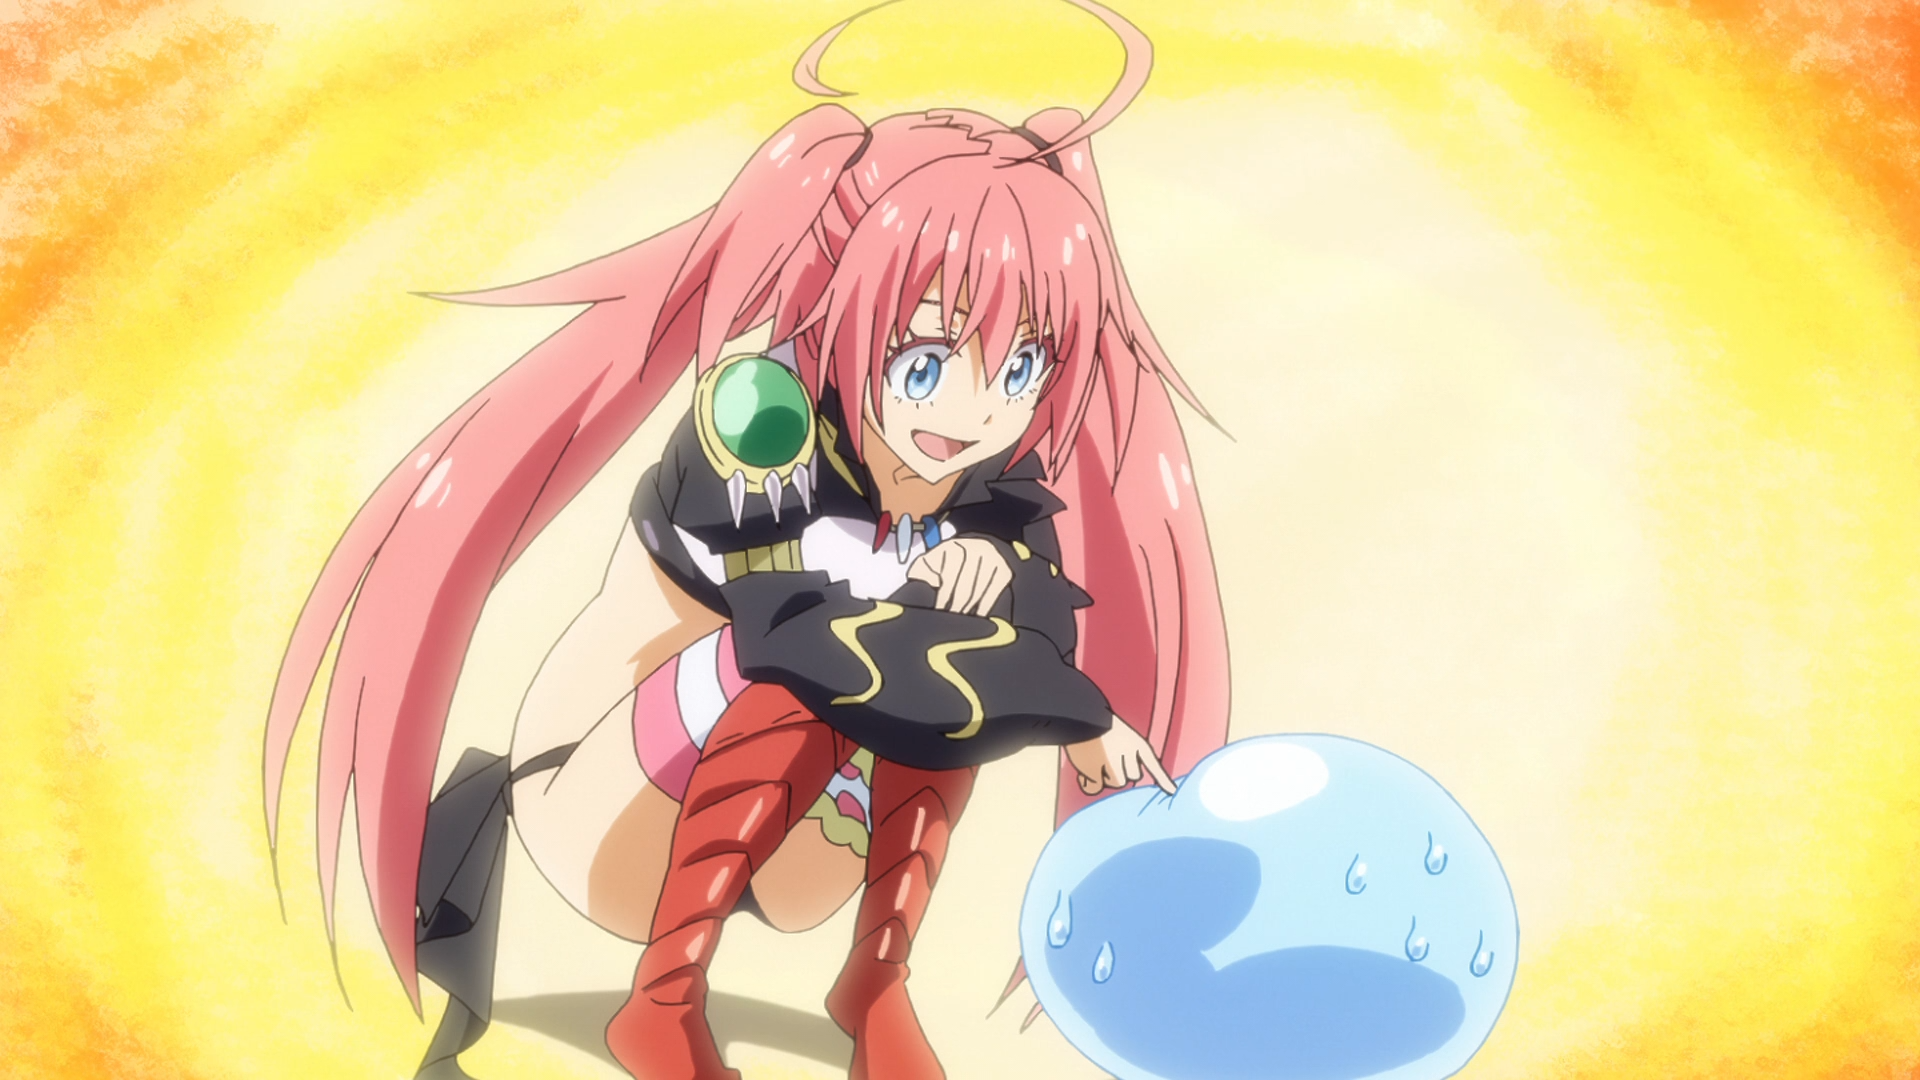 Demon Lord Mirim gently pokes at Rimiru's blobby slime body in a scene from the That Time I Got Reincarnated as a Slime TV anime.